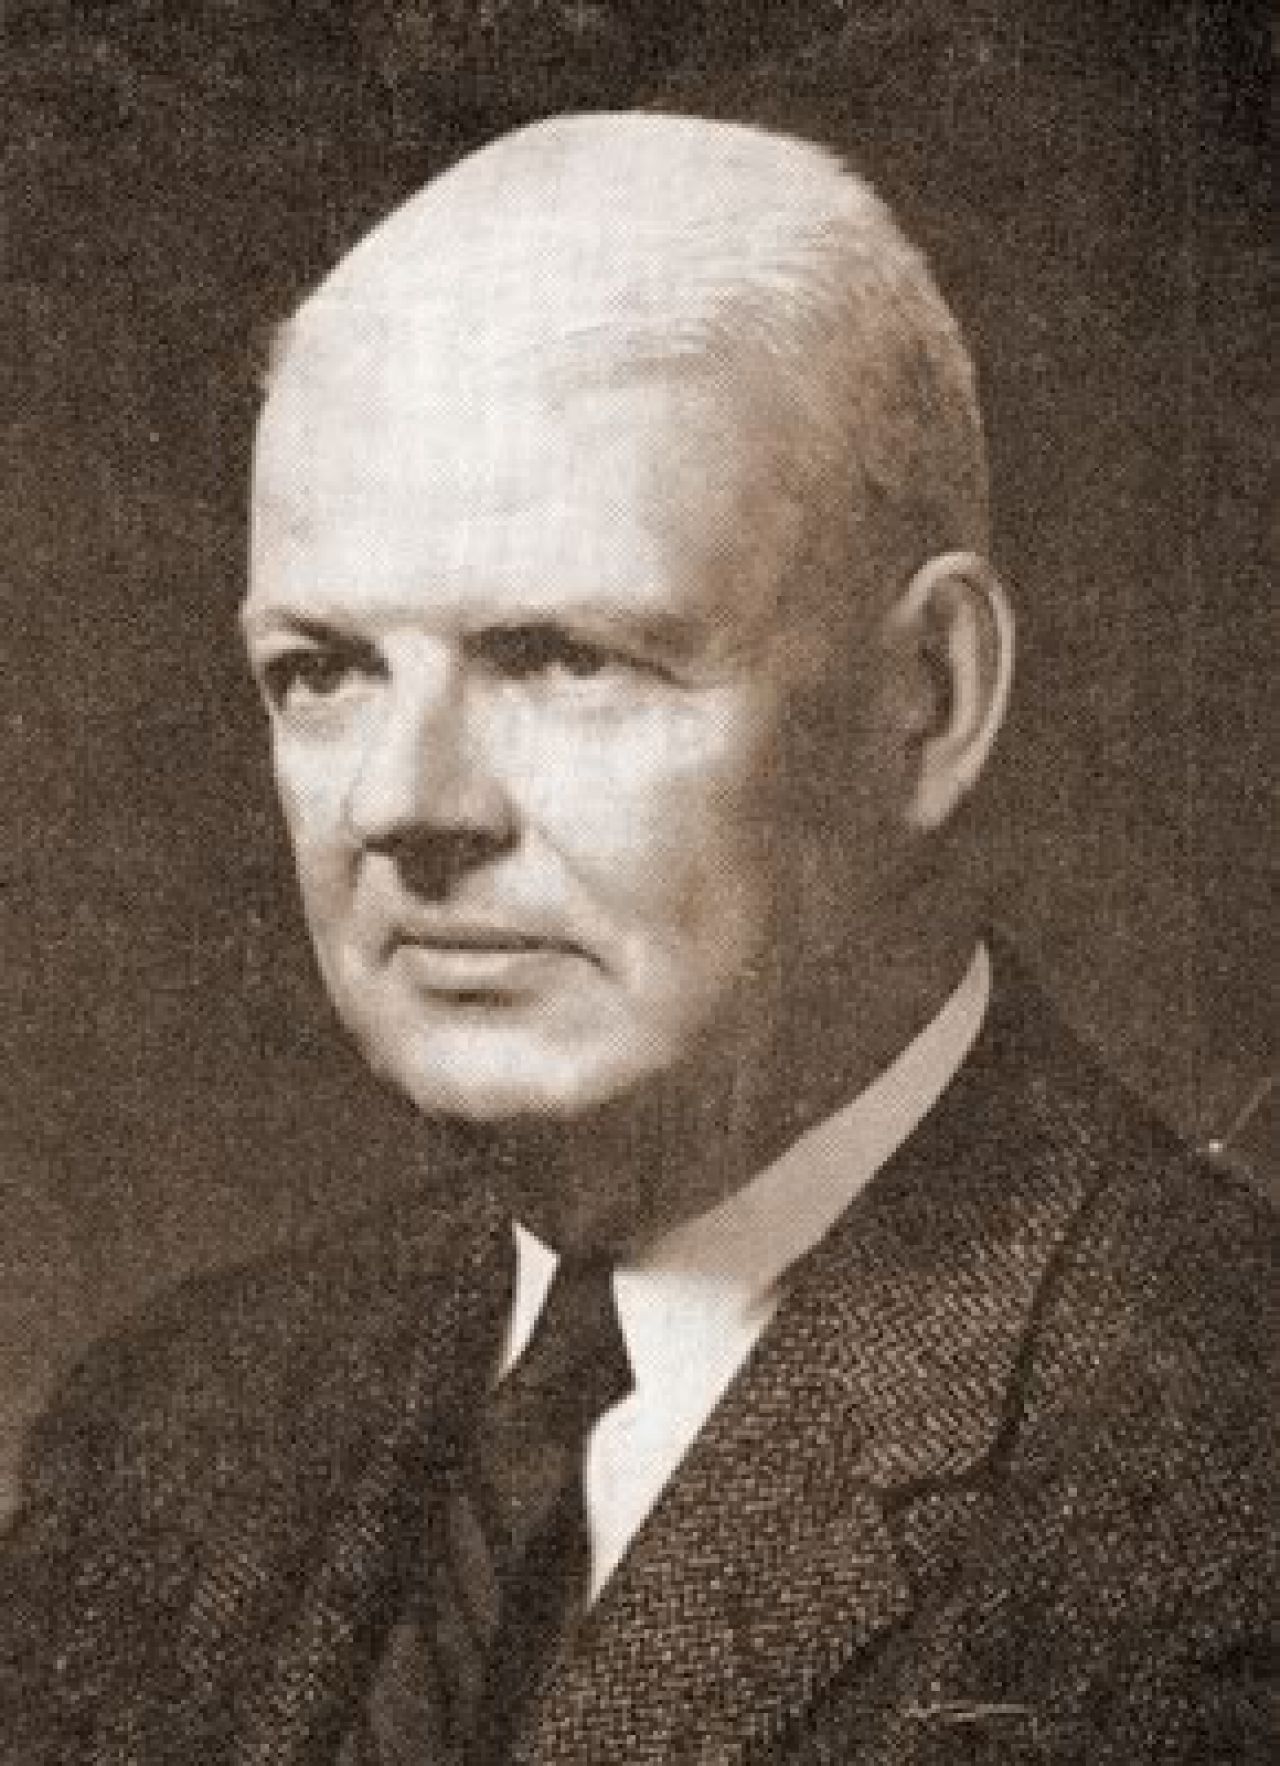 Black-and-white photo of balding main in coat and tie.